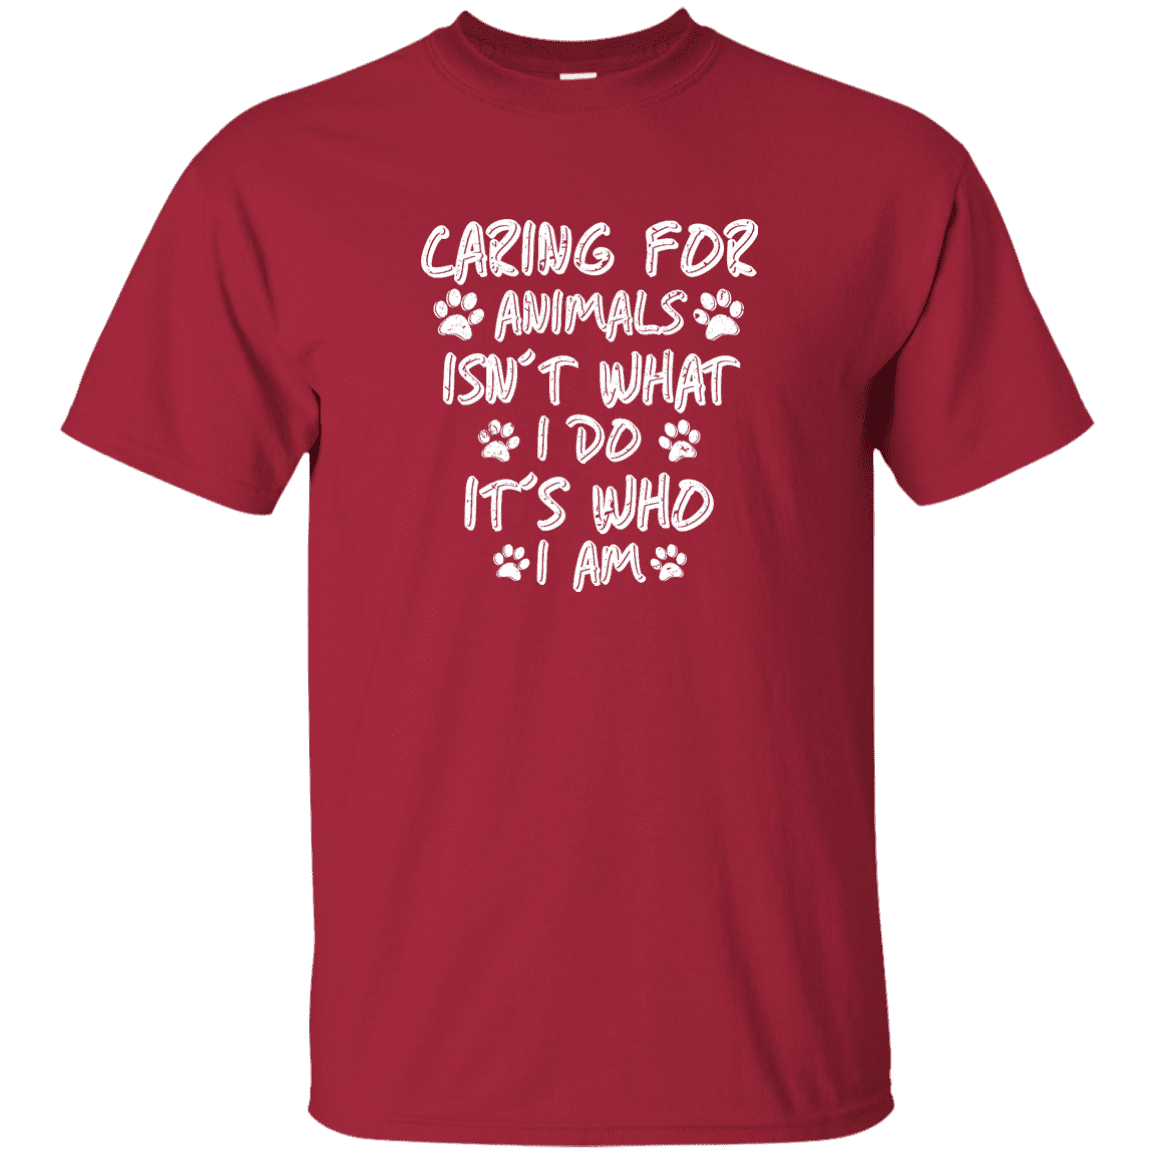 Caring For Animals - T Shirt.